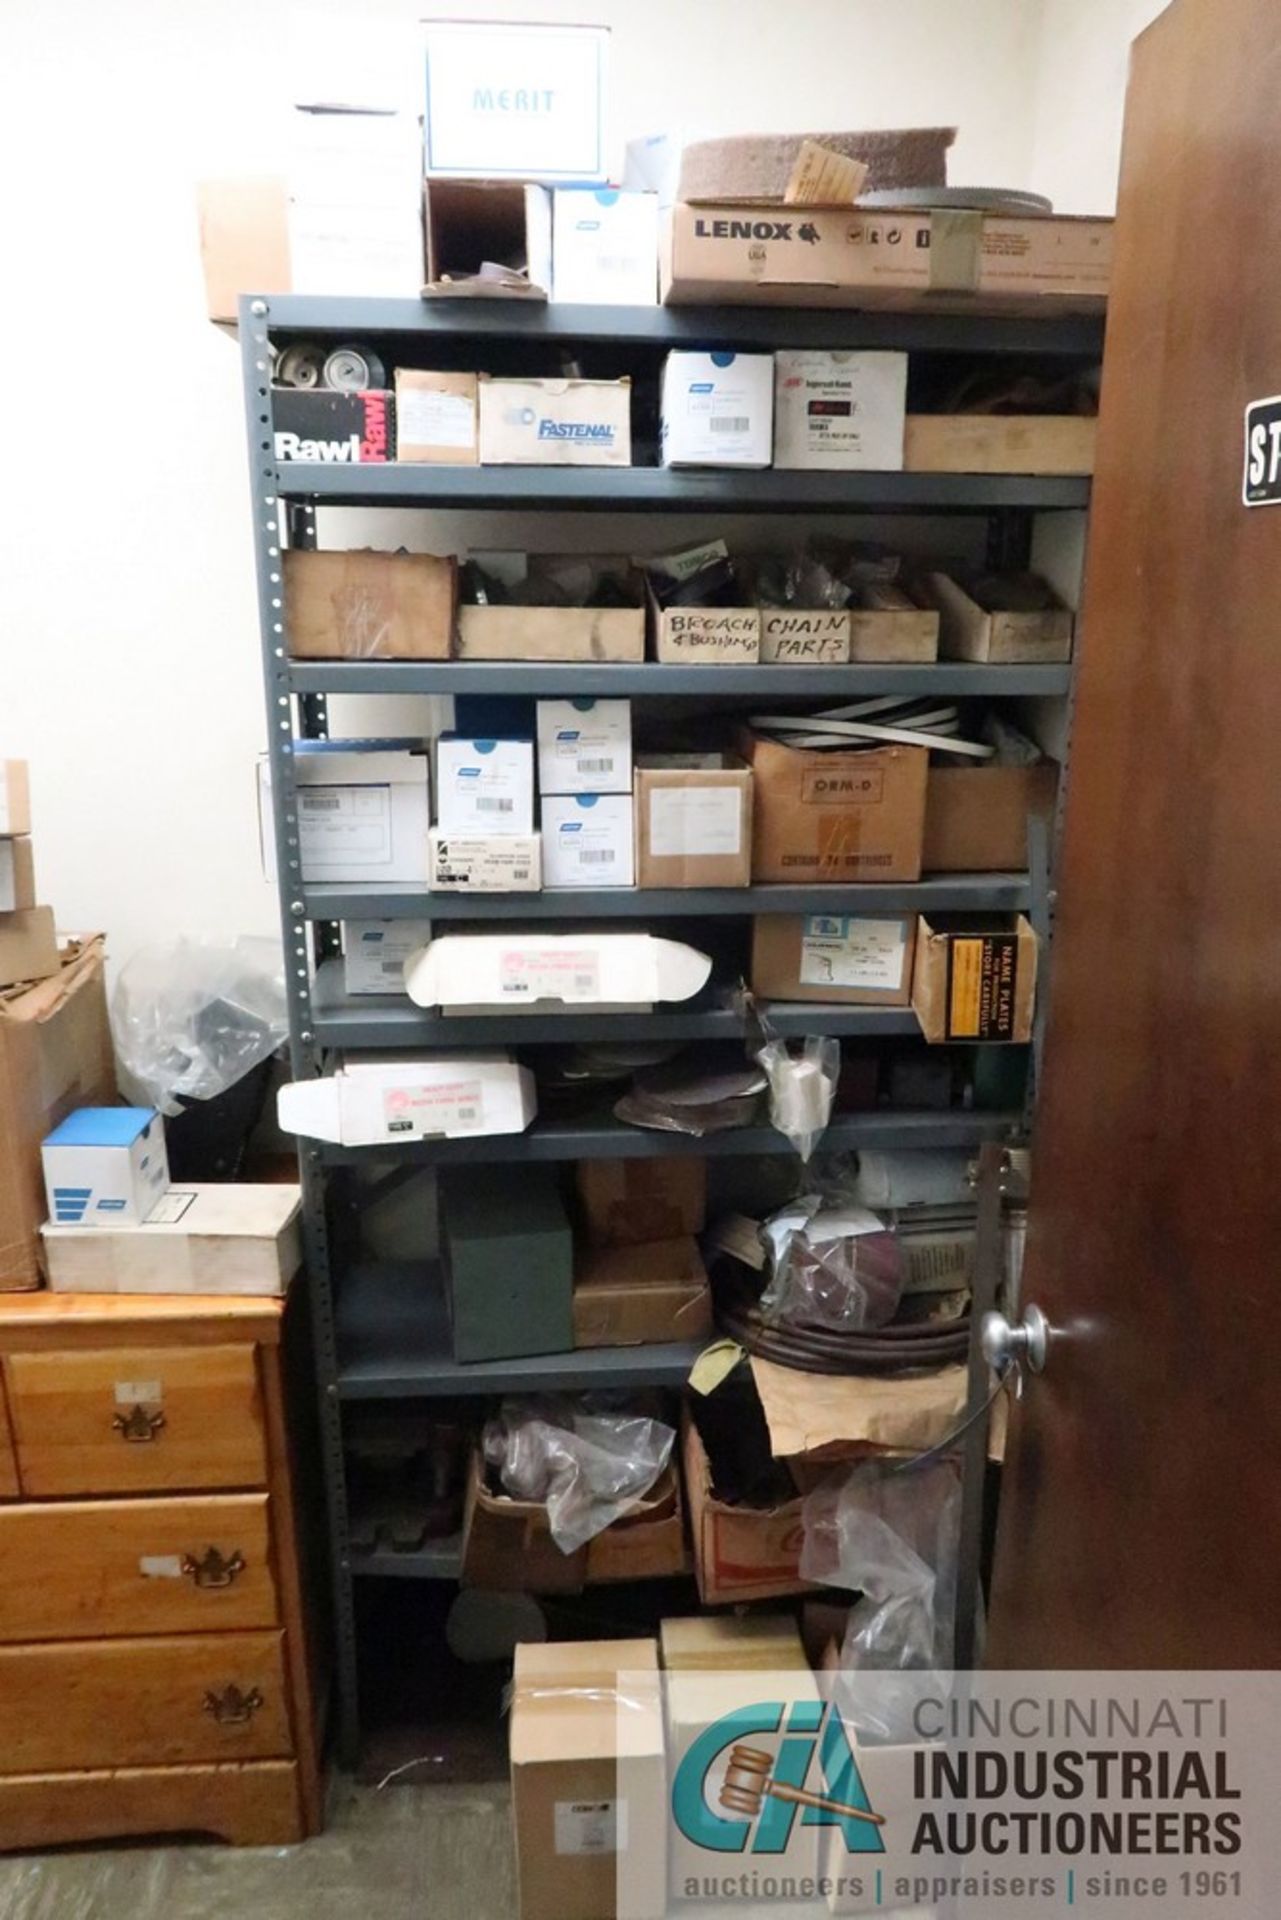 CONTENTS OF STORAGE ROOM - MISCELLANEOUS MACHINE TOOLING, PERISHABLES, ABRASIVES, OFFICE SUPPLIES,